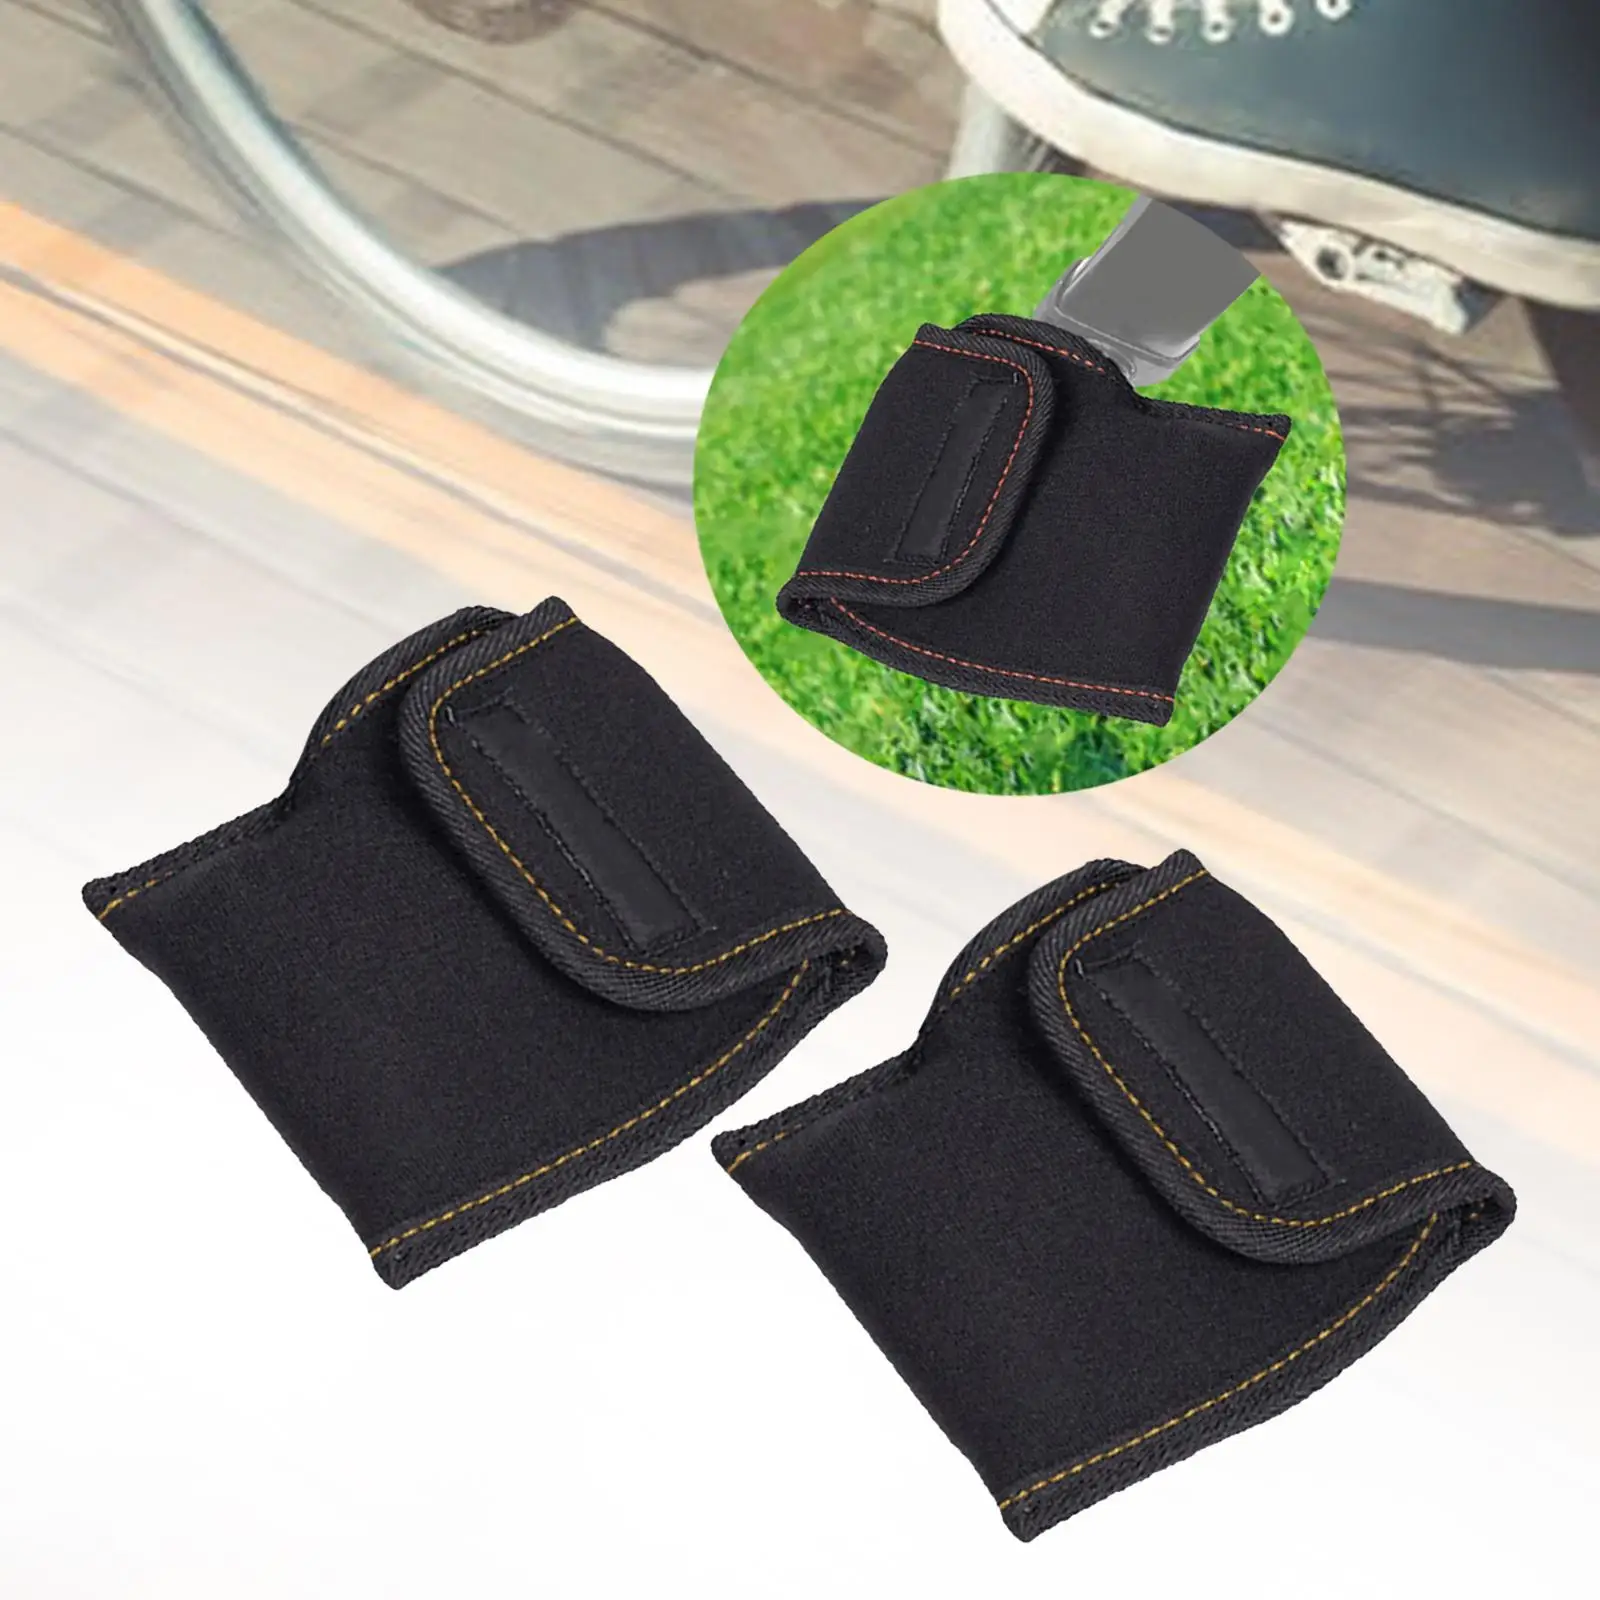 1 Pair Bike Pedal Protective Cover Oxford Cloth Cleat Sleeves for Riding